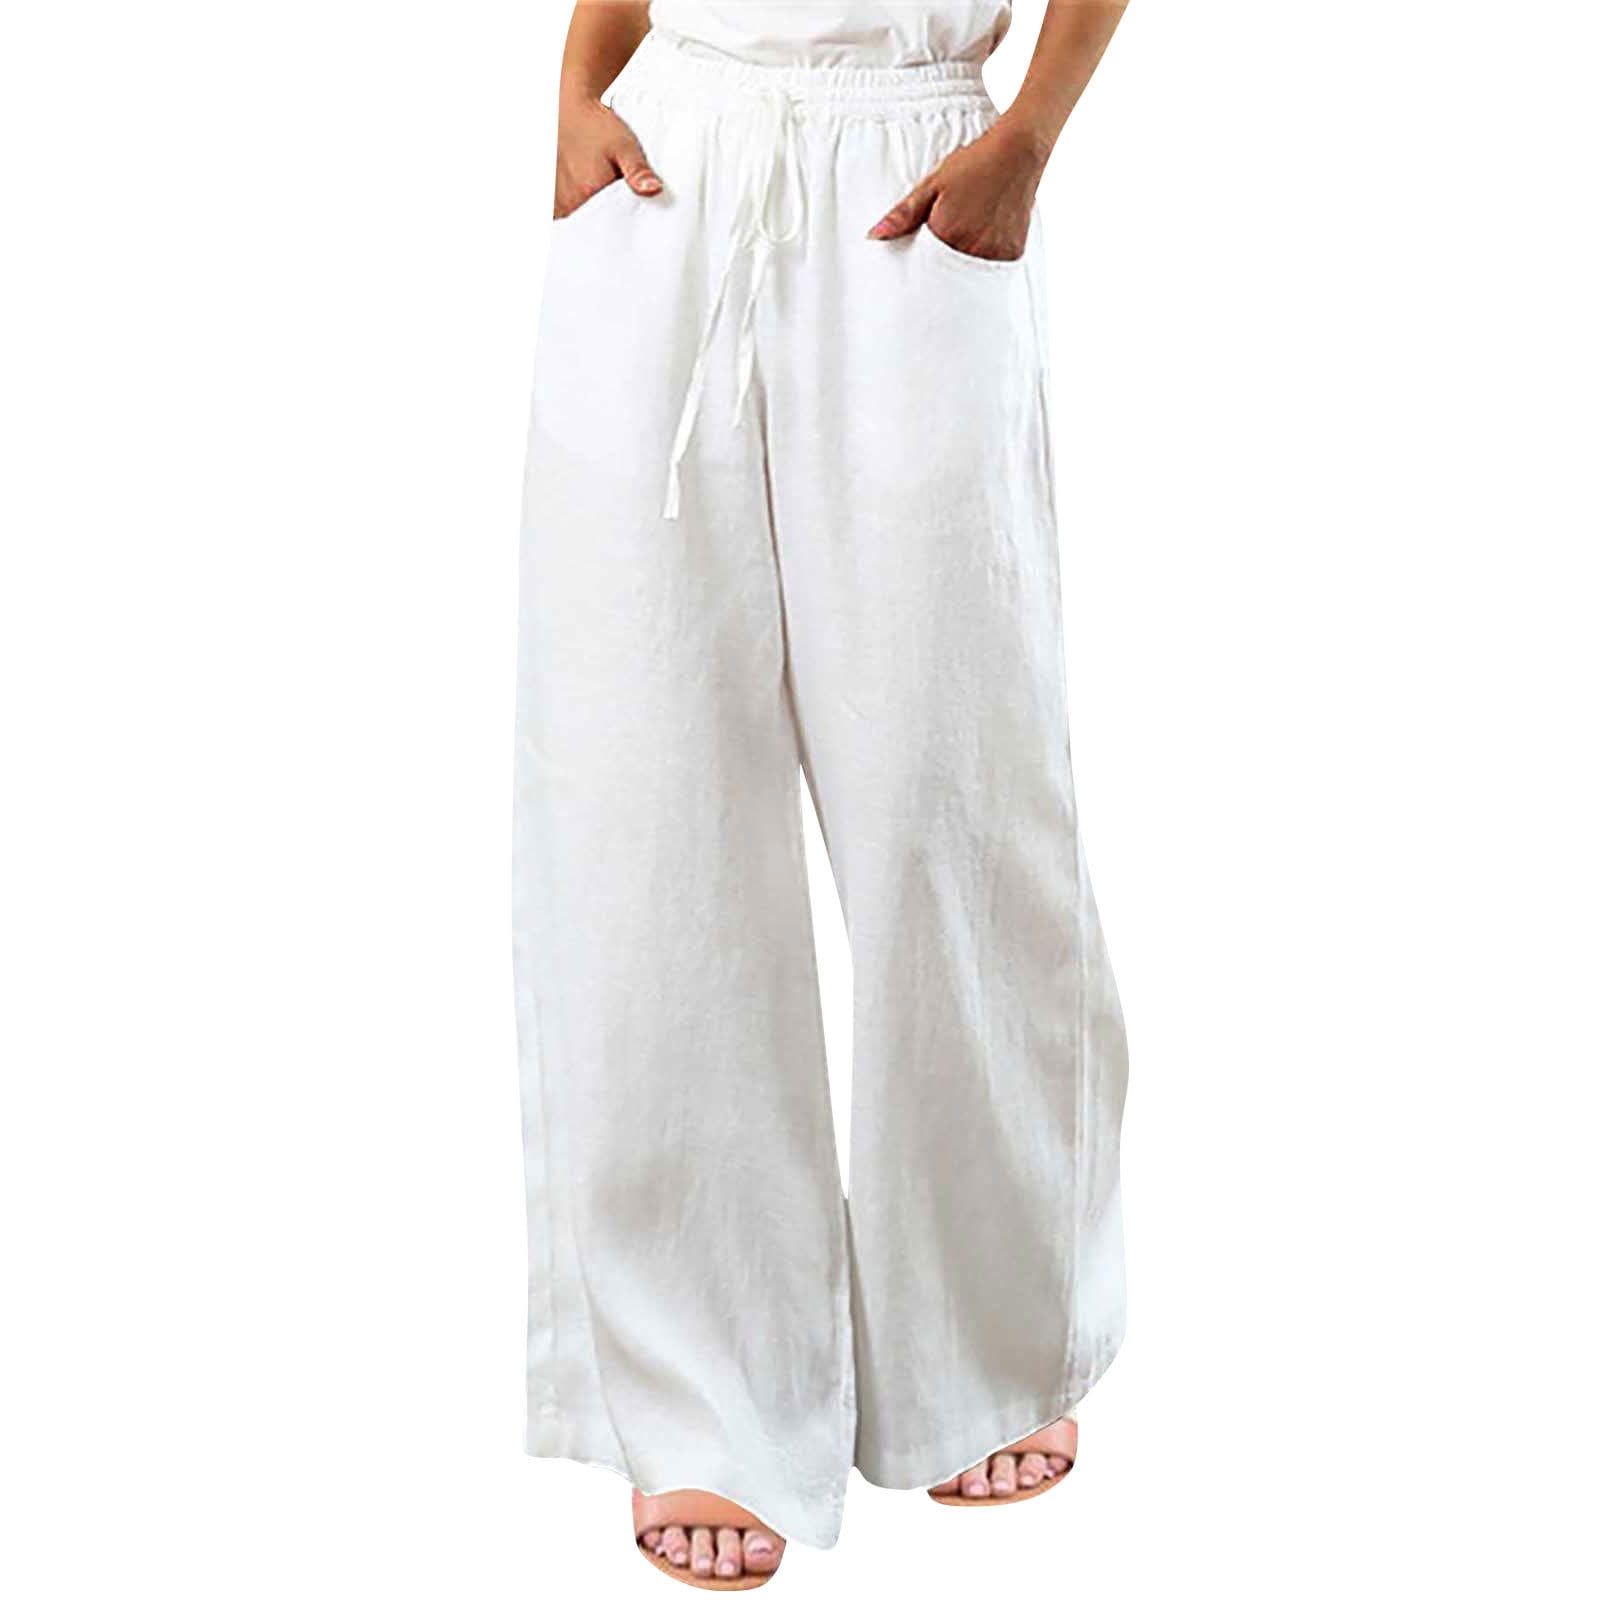 Zkuisw Women's Solid Color Pants Casual Loose Straight Leg